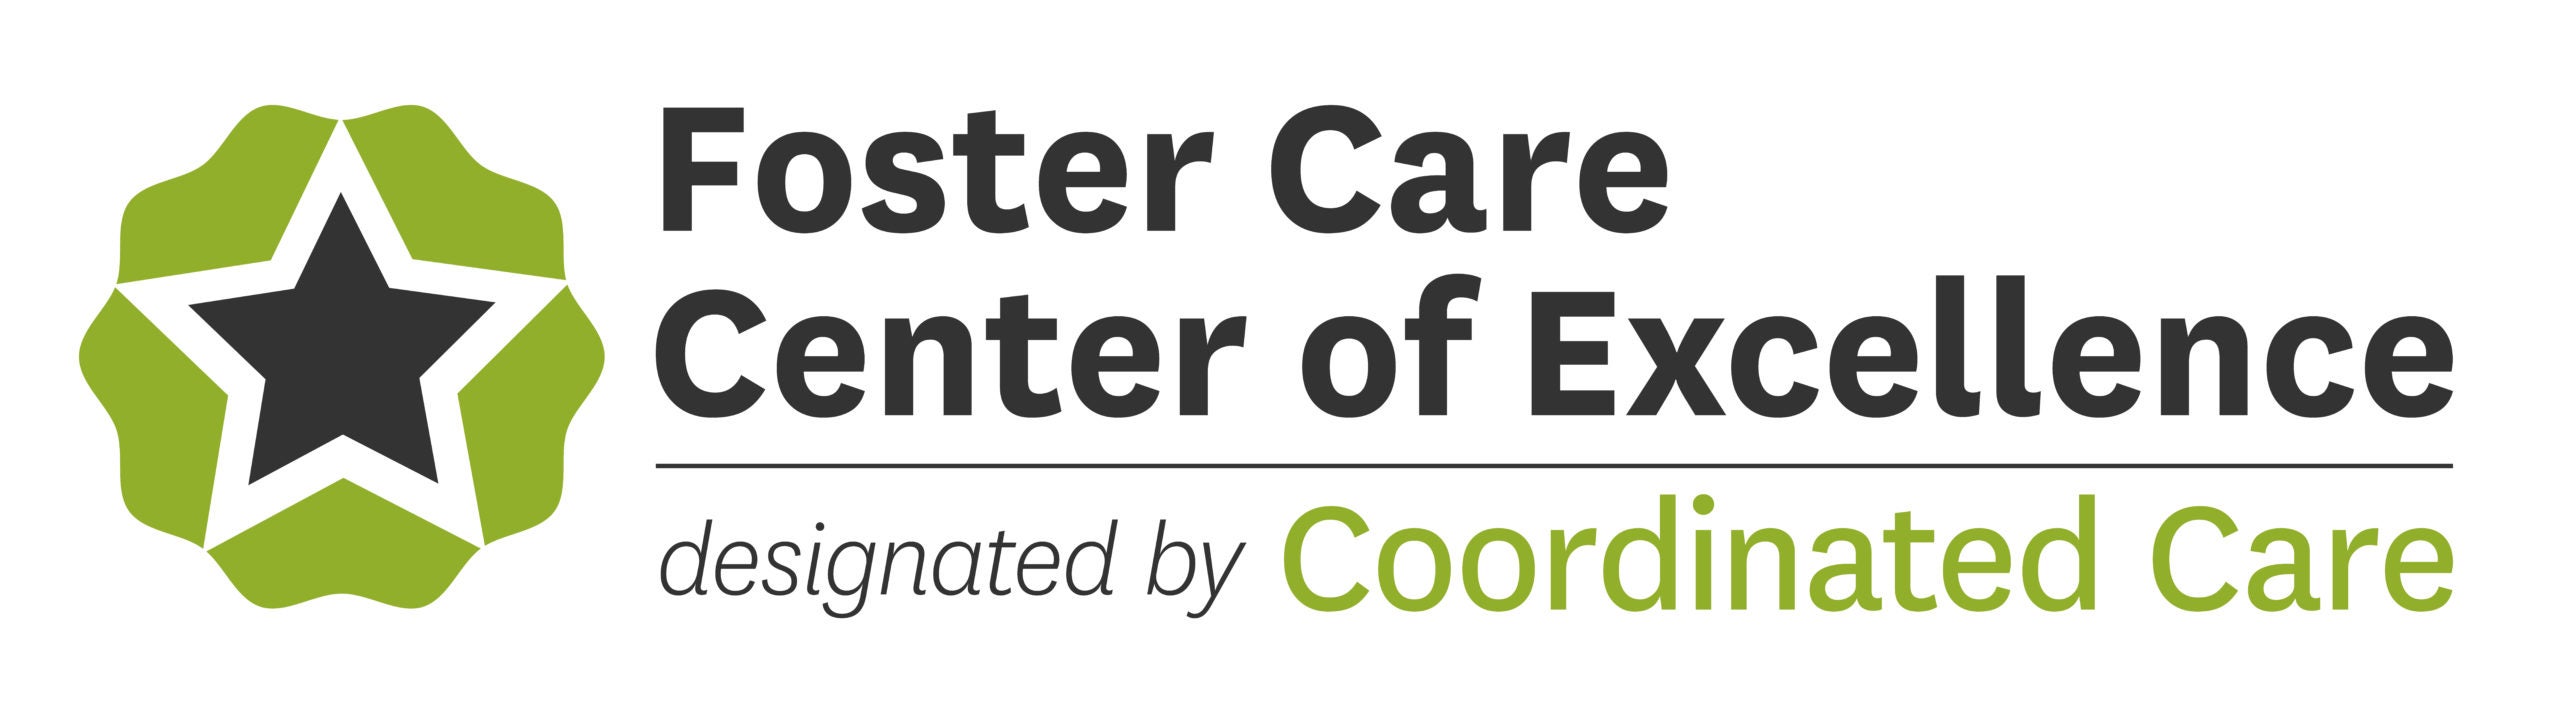 Coordinated Care Center of Excellence